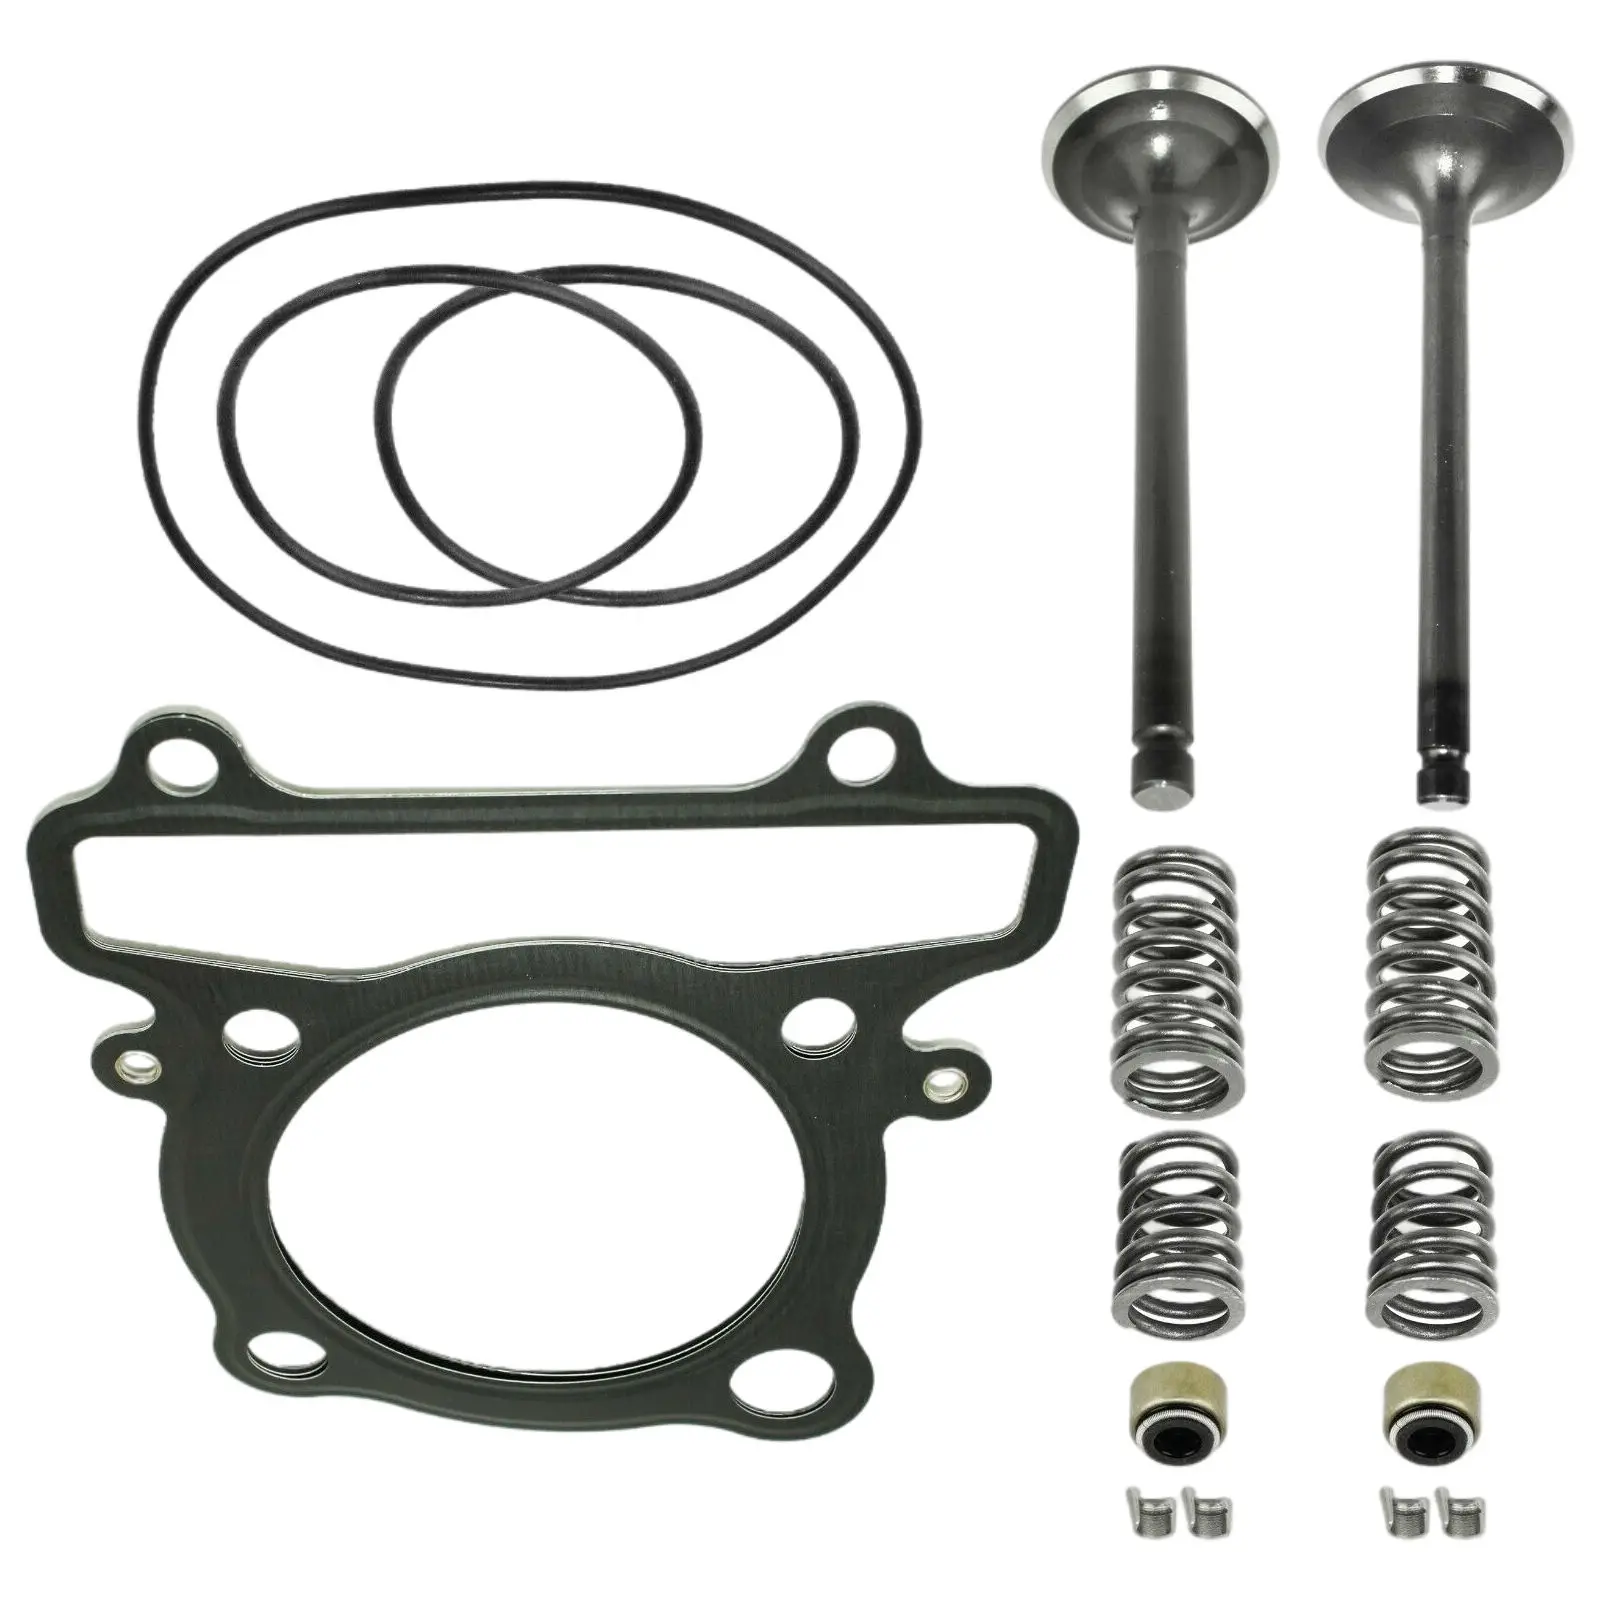 Cylinder Intake Exhaust Valve Gasket Kit CE0067XK117LL Fit for Yamaha 1987-04 Accessories 16Pcs